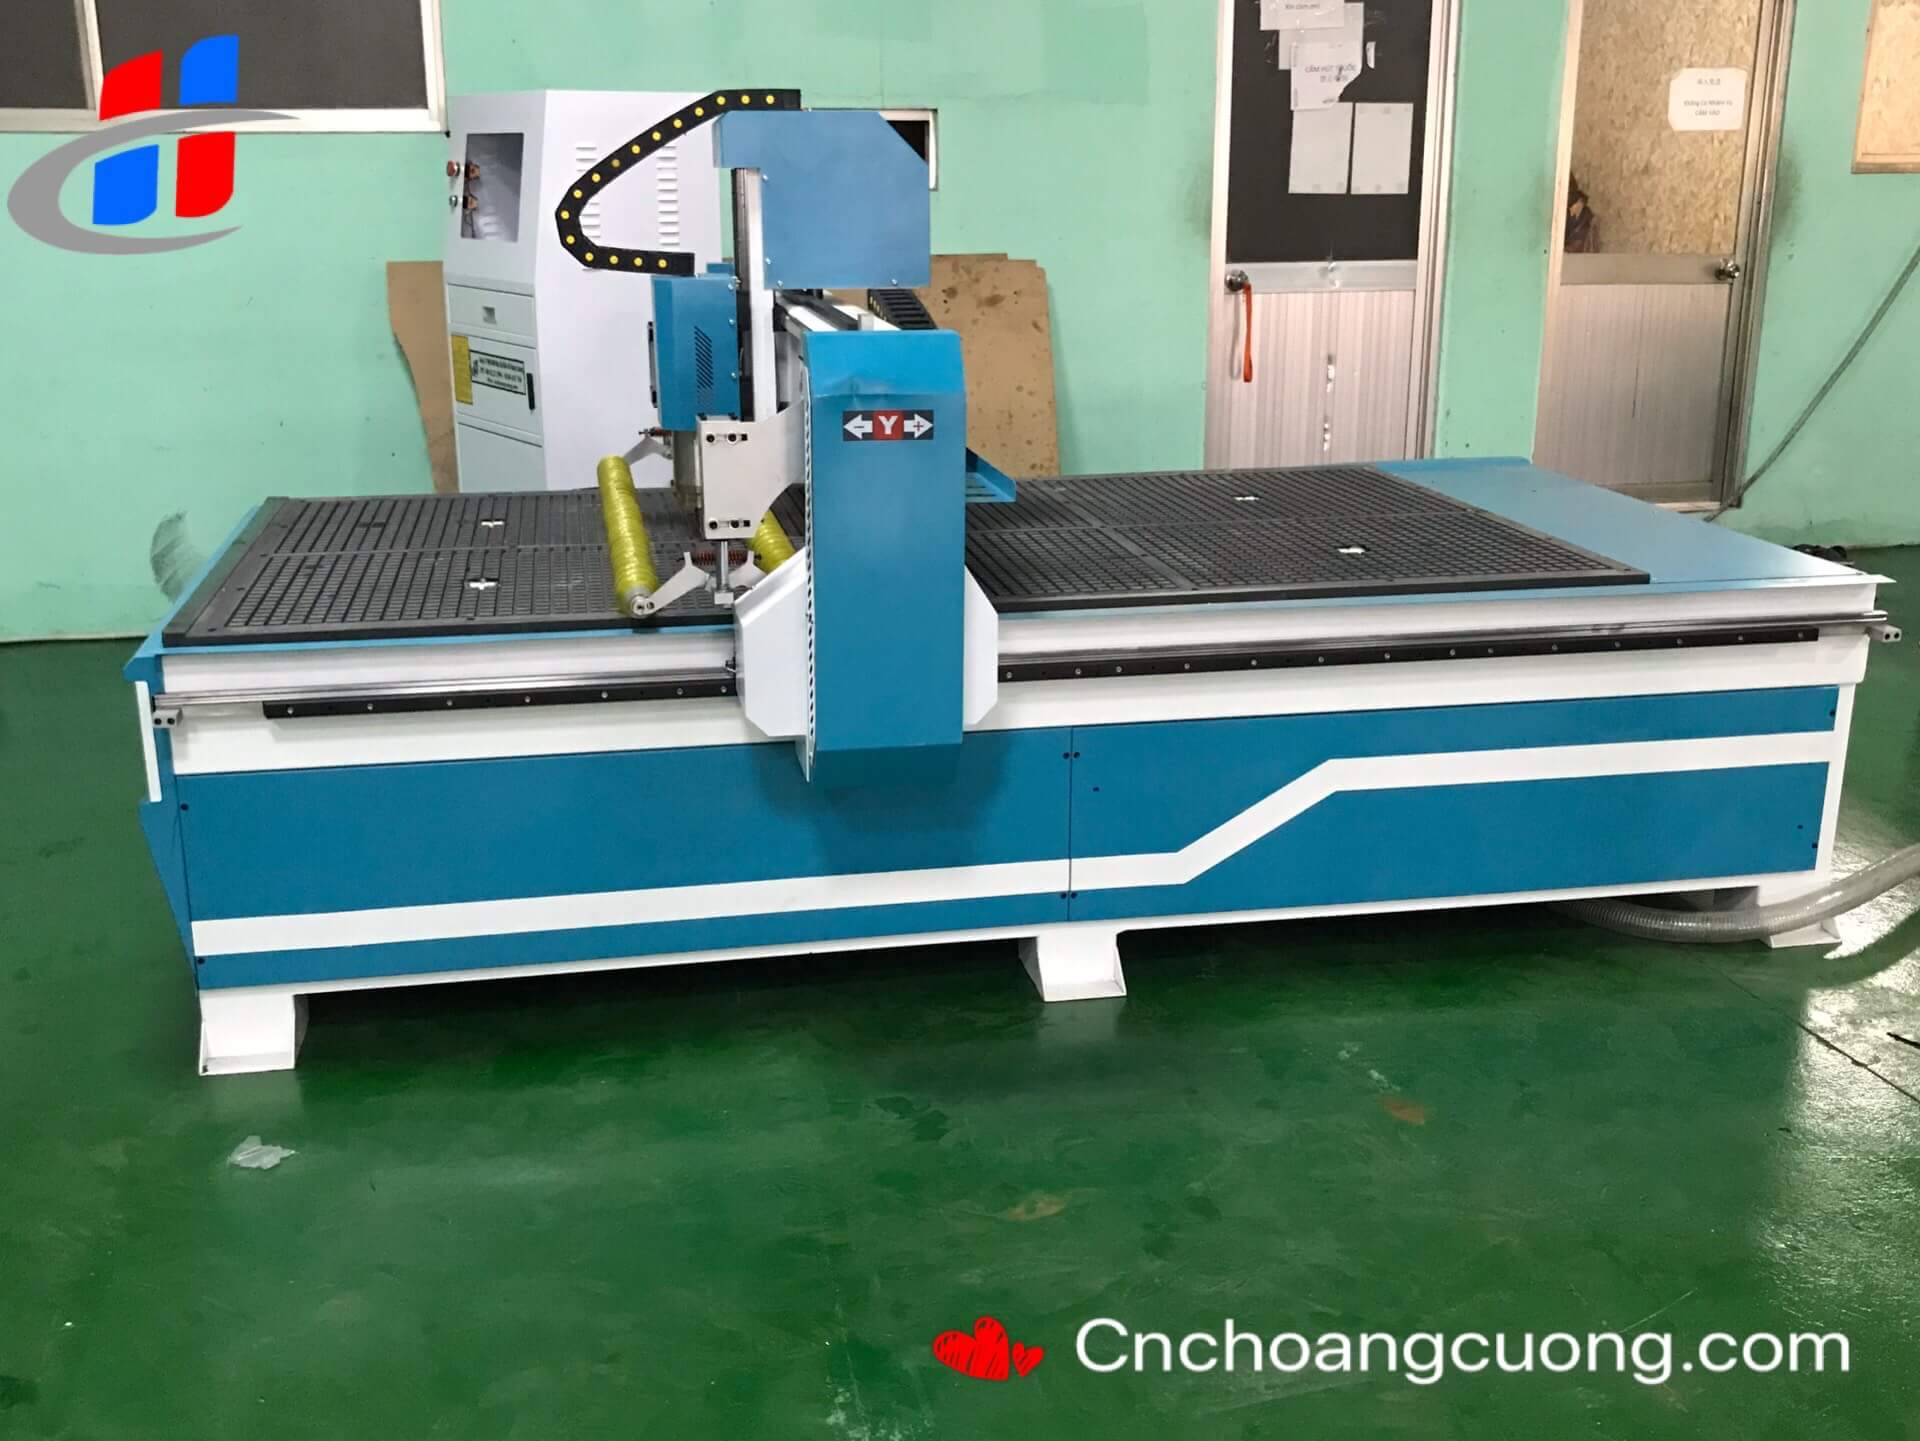 https://cnchoangcuong.com/?post_type=product&p=1860&preview=true